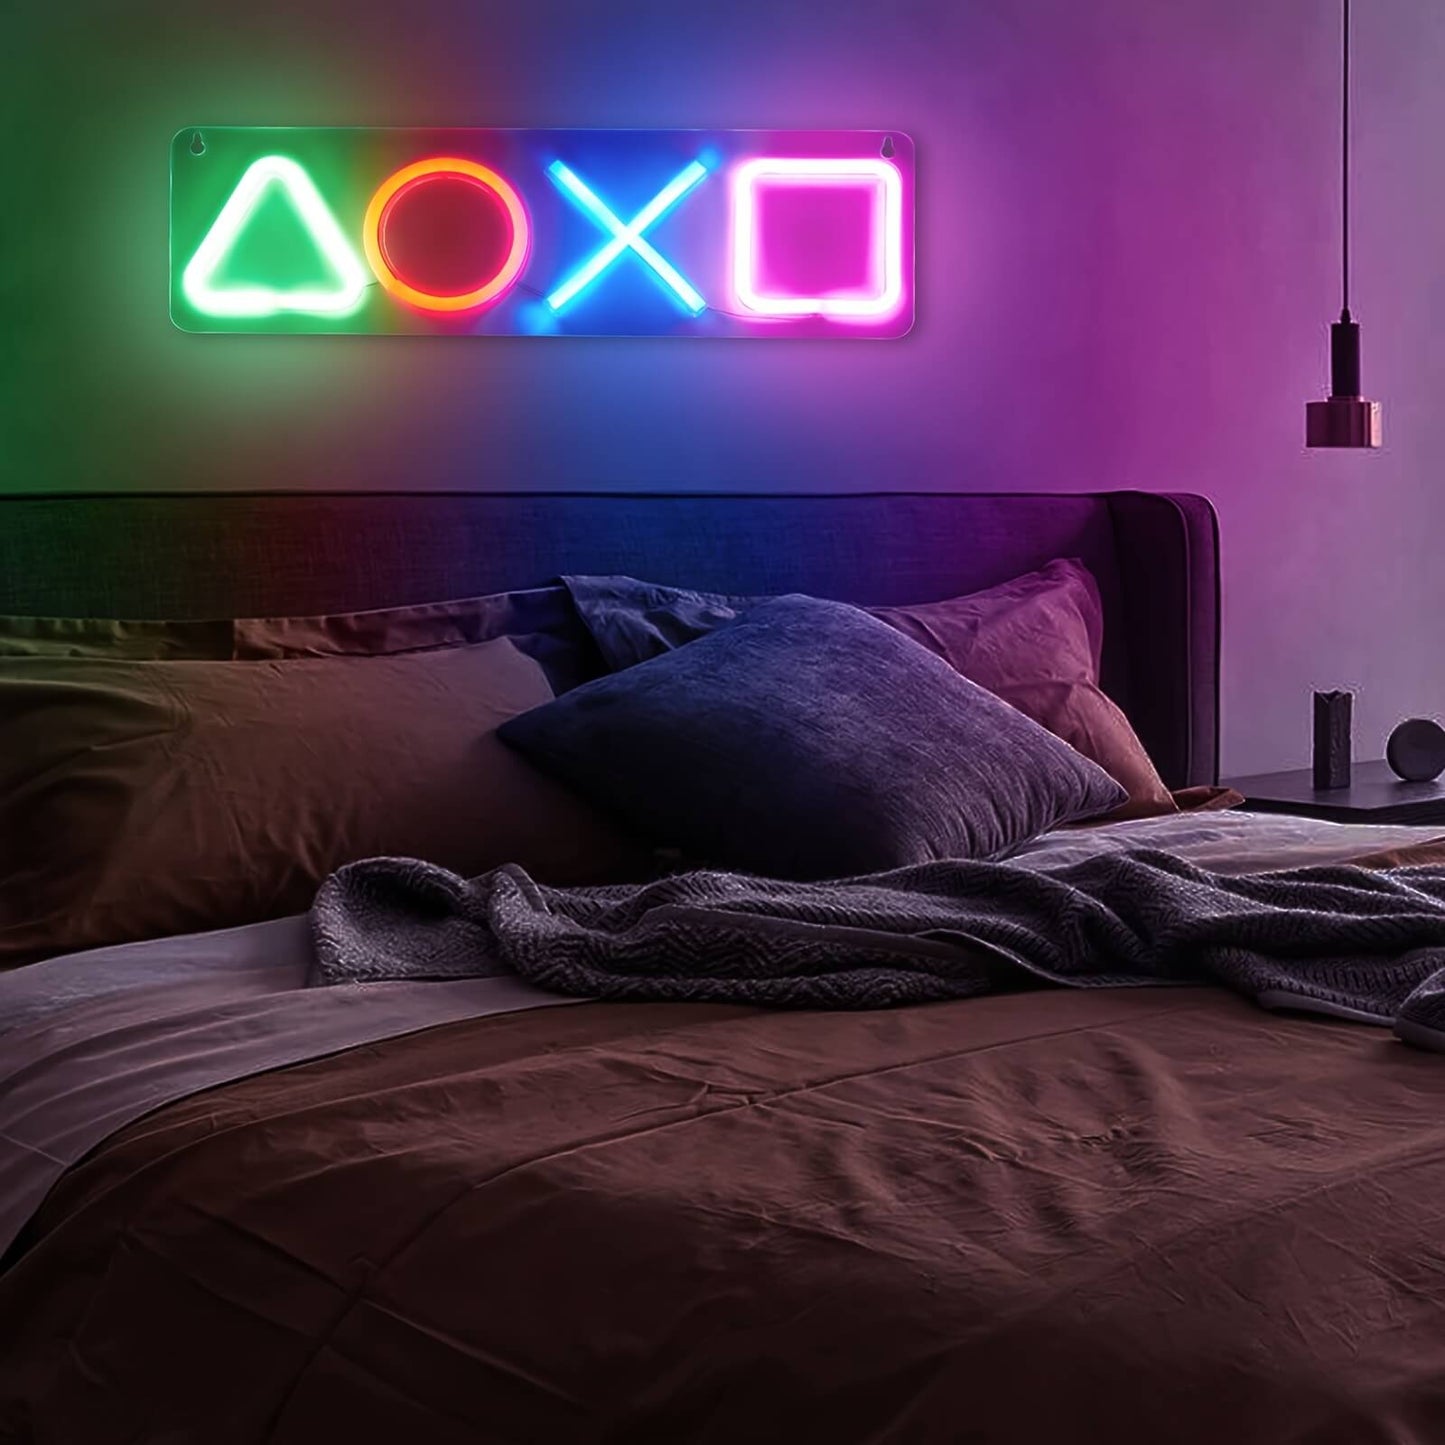 Neon Playstation Buttons Sign Light